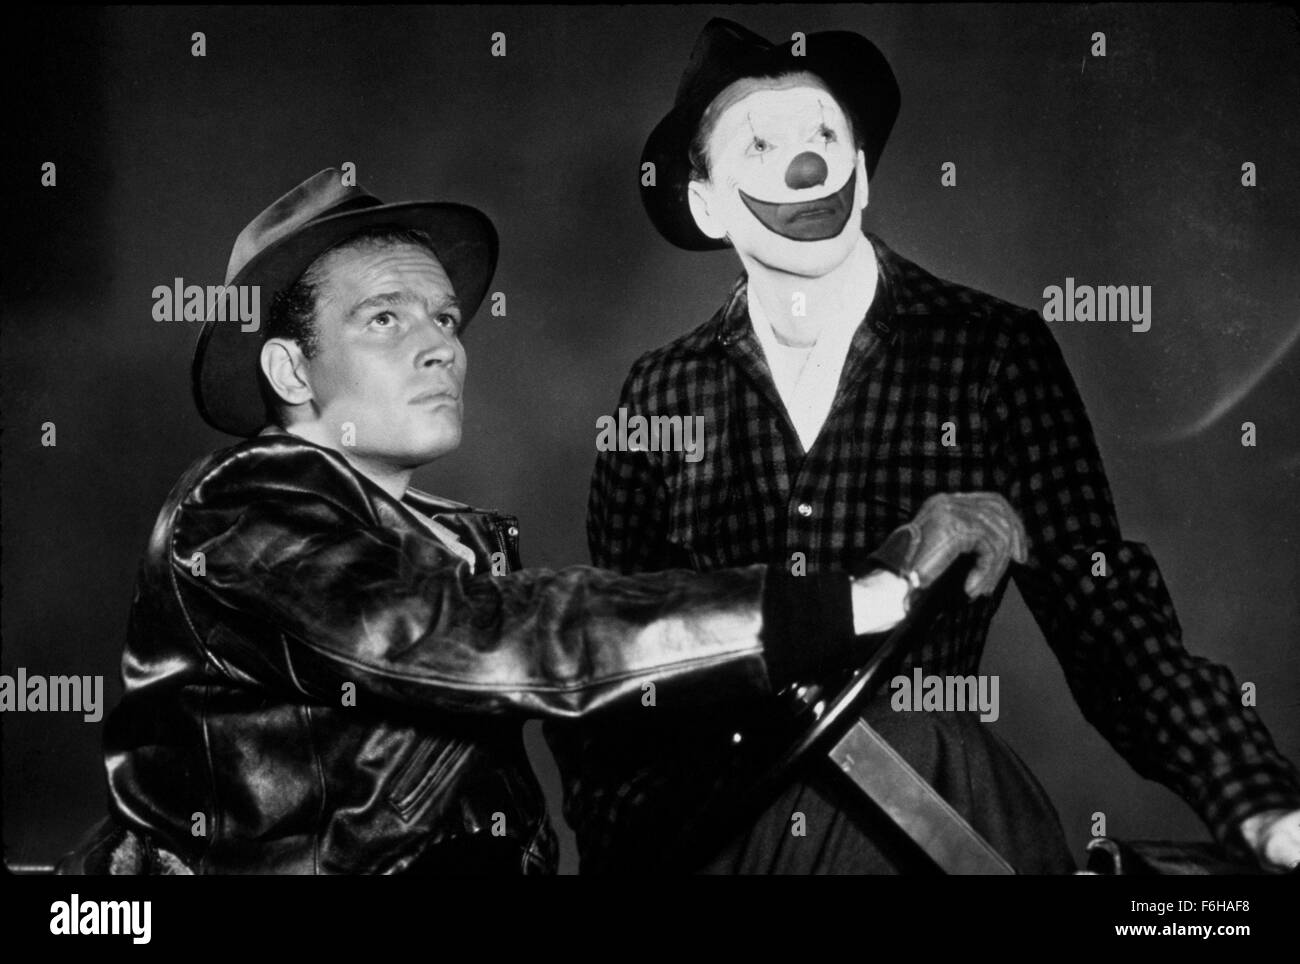 1952, Film Title: GREATEST SHOW ON EARTH, Director: CECIL B DeMILLE, Studio: PARAMOUNT, Pictured: 1952, AWARDS - ACADEMY, BEST PICTURE, CLOWN MAKEUP, CHARLTON HESTON, JAMES STEWART, OSCAR RETRO, OSCAR (MOVIE), CLOWN, LEATHER JACKET, DRIVING. (Credit Image: SNAP) Stock Photo